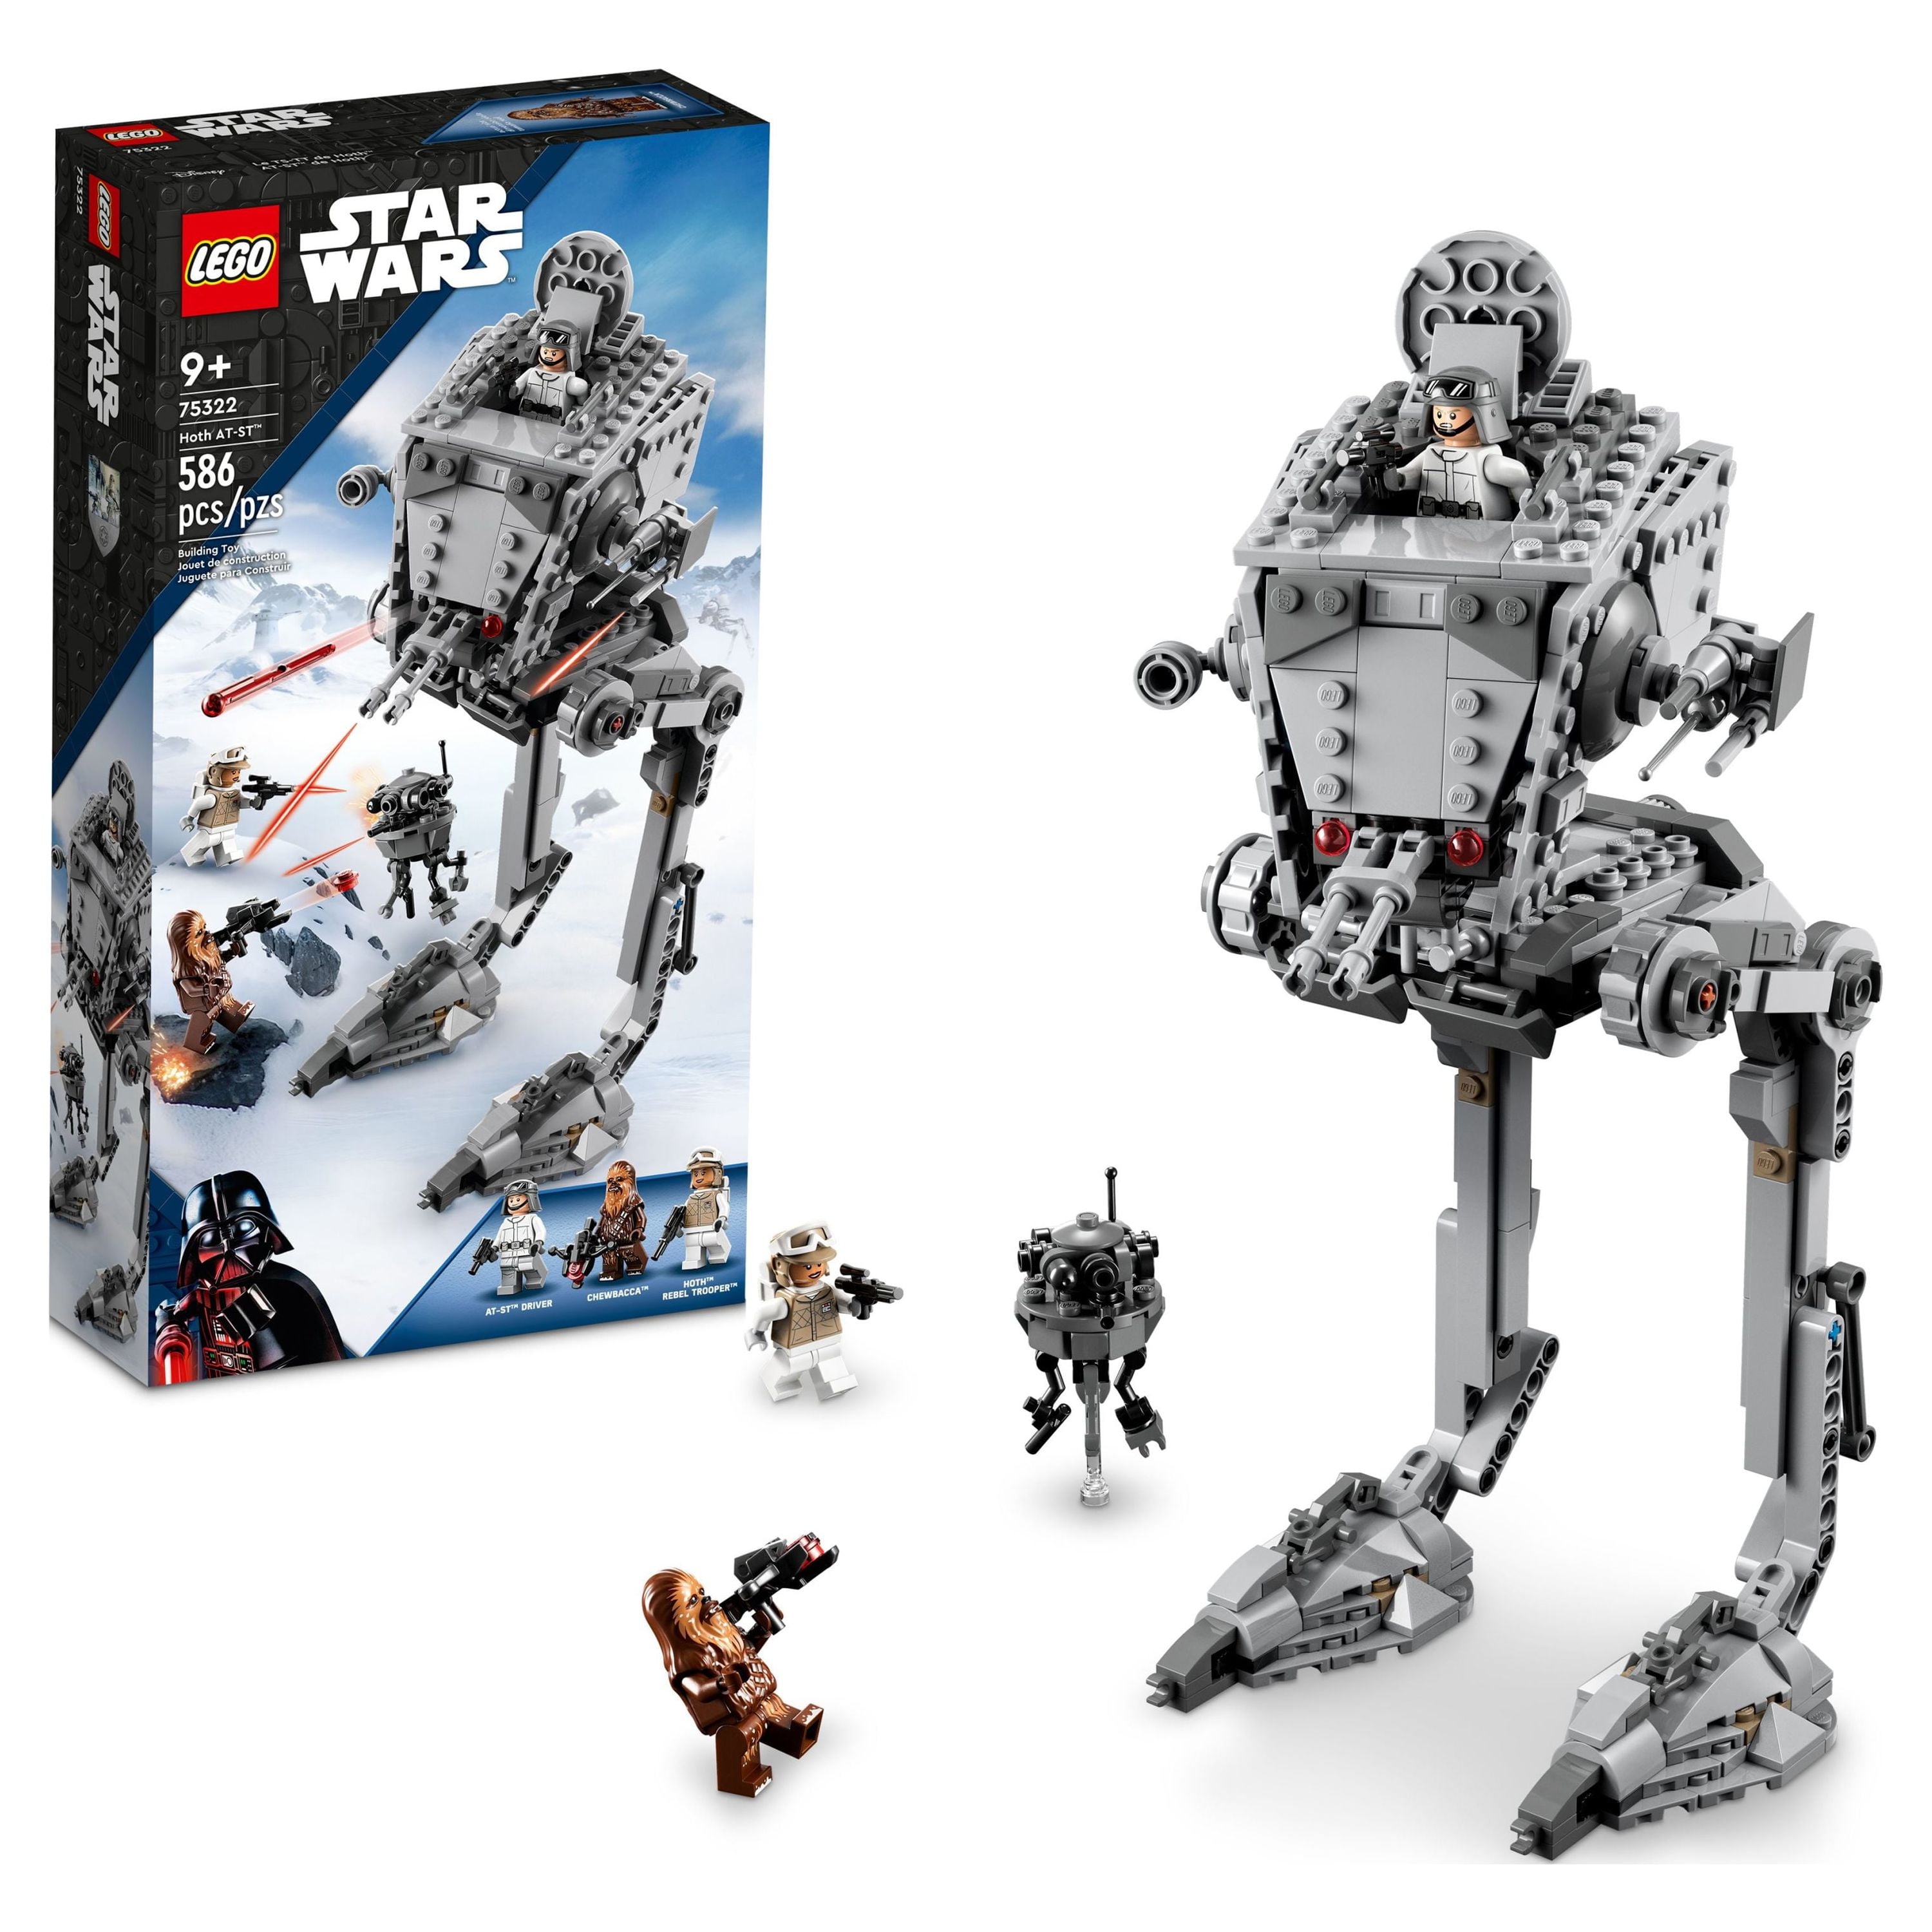 LEGO Star Wars 332nd Ahsoka's Clone Trooper Battle Pack 75359 Building Toy  Set with 4 Star Wars Figures Including Clone Captain Vaughn, Star Wars Toy  for Kids Ages 6-8 or any Fan